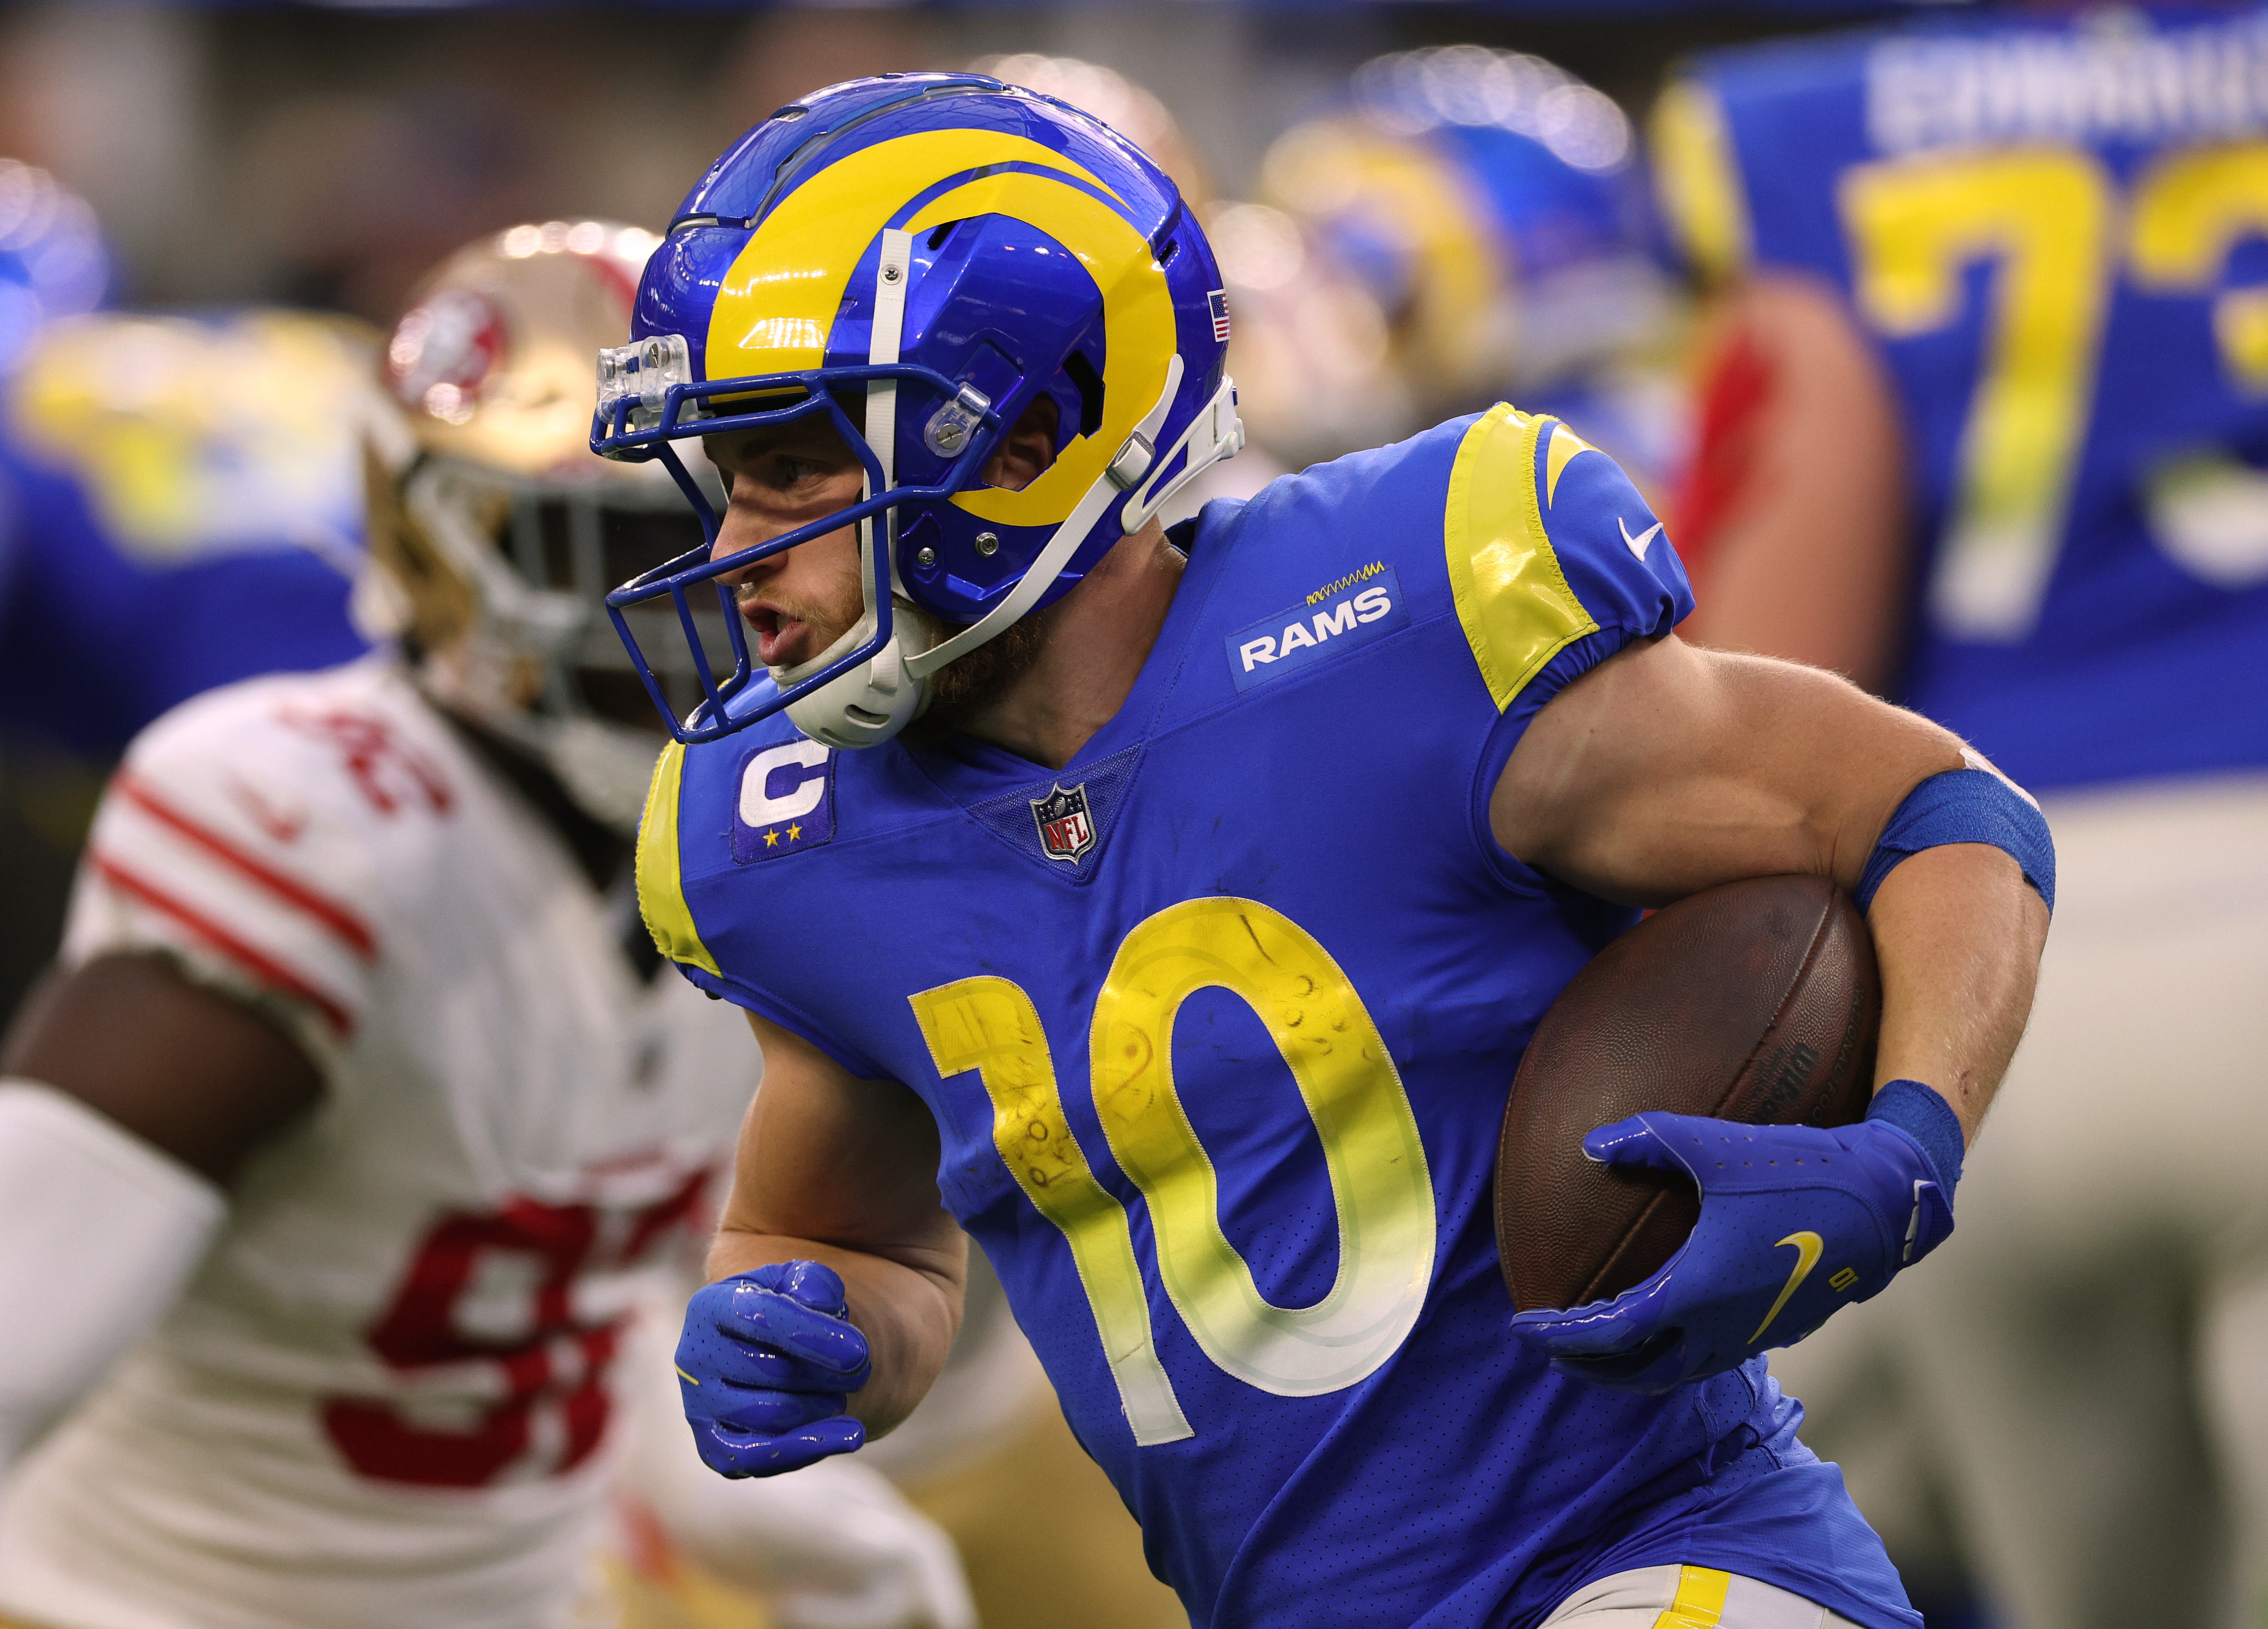 Cooper Kupp #10 of the Los Angeles Rams runs after a handoff during a 27-24 loss to the San Francisco 49ers at SoFi Stadium on January 09, 2022 in Inglewood, California.